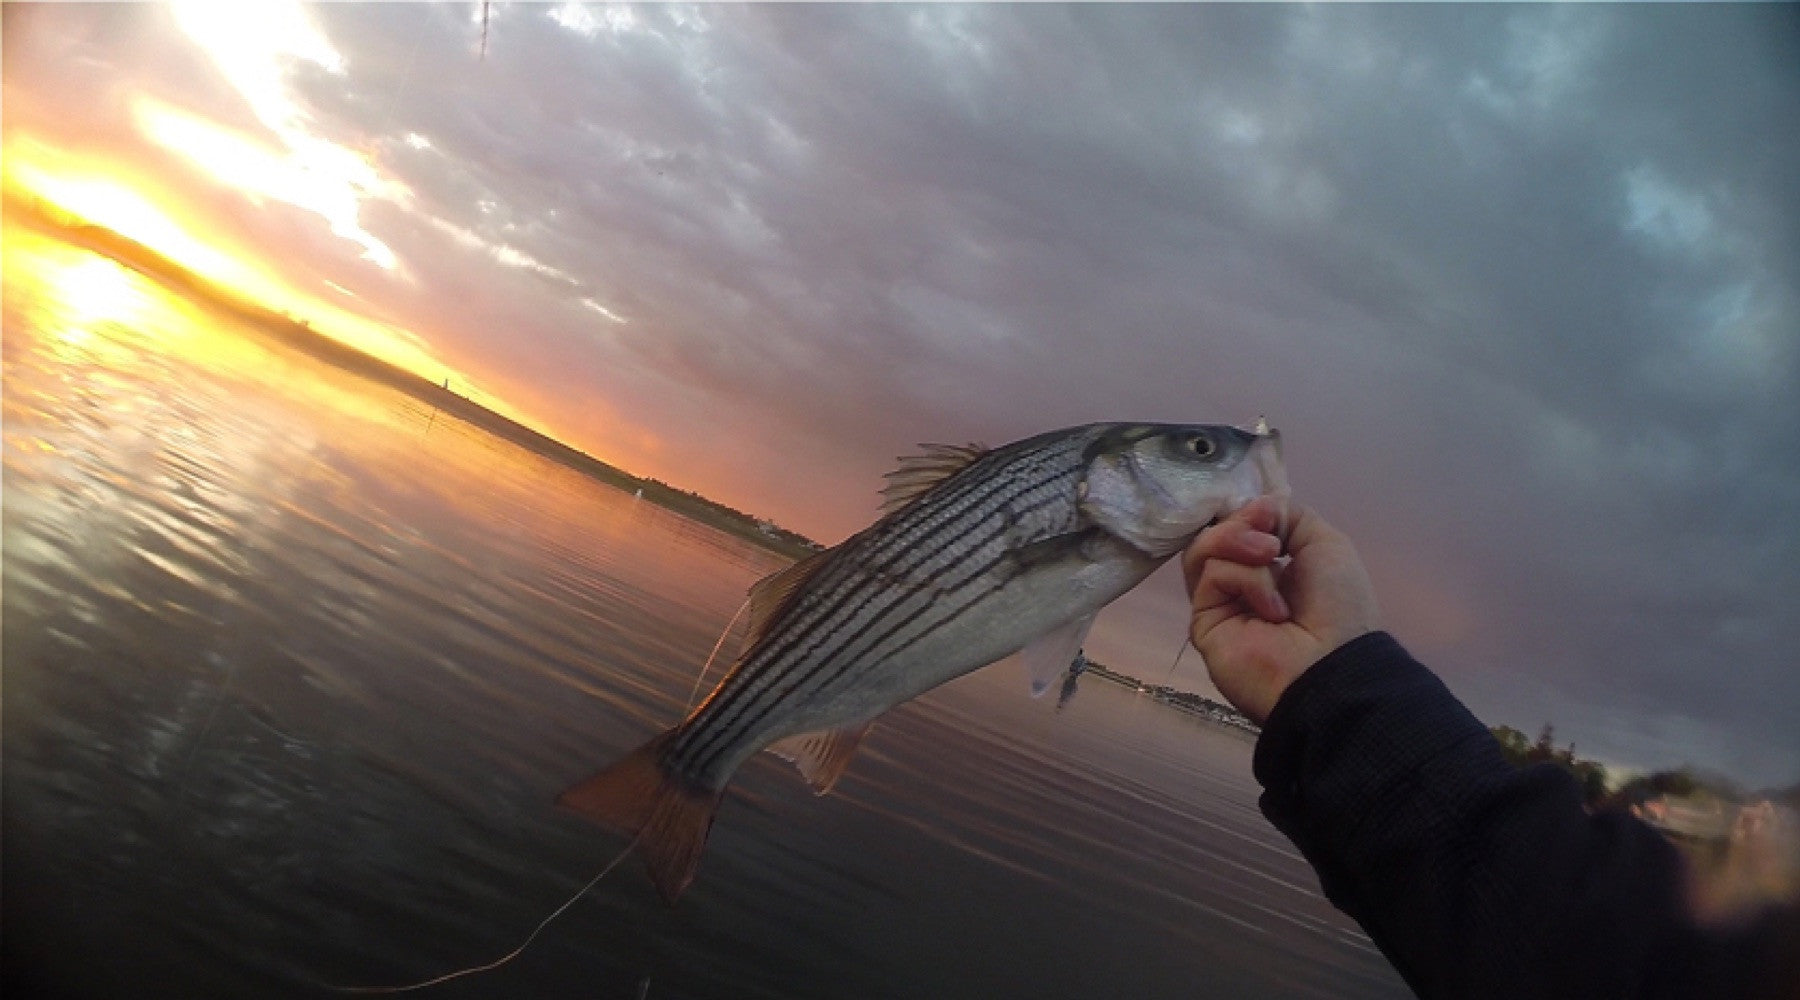 Video: Fly Fishing for Striped Bass in Boston Harbor